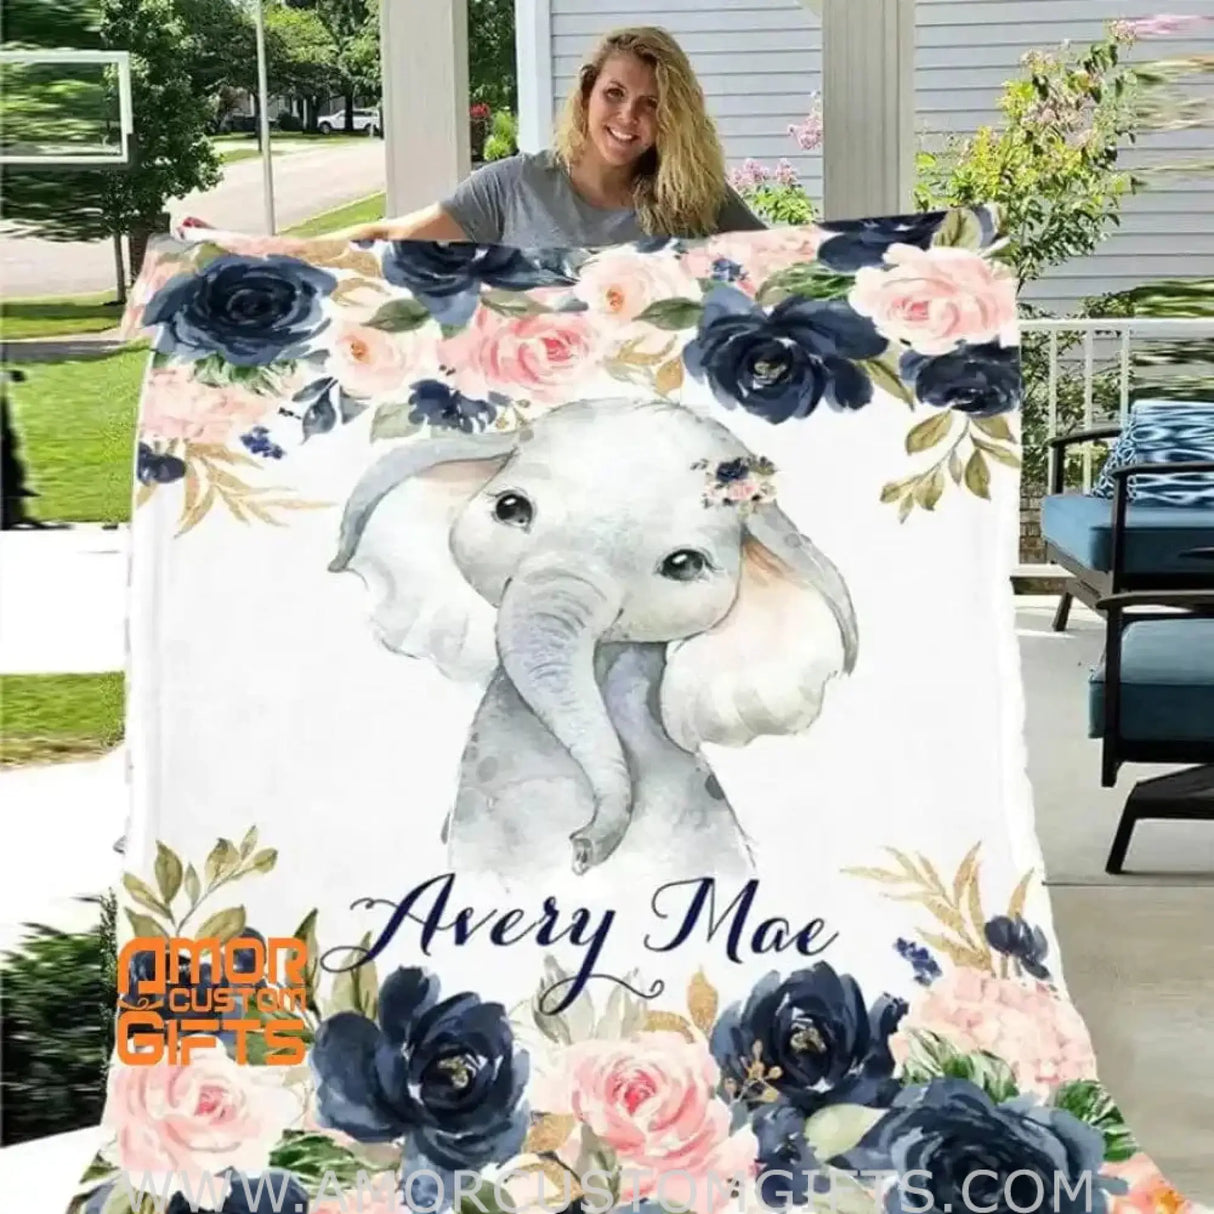 Blankets Customized Floral Baby Name Blankets for Infants Newborns Babies, Floral Elephant Blanket, Baby Girl Name Blanket, Custom Name Baby Shower Gift